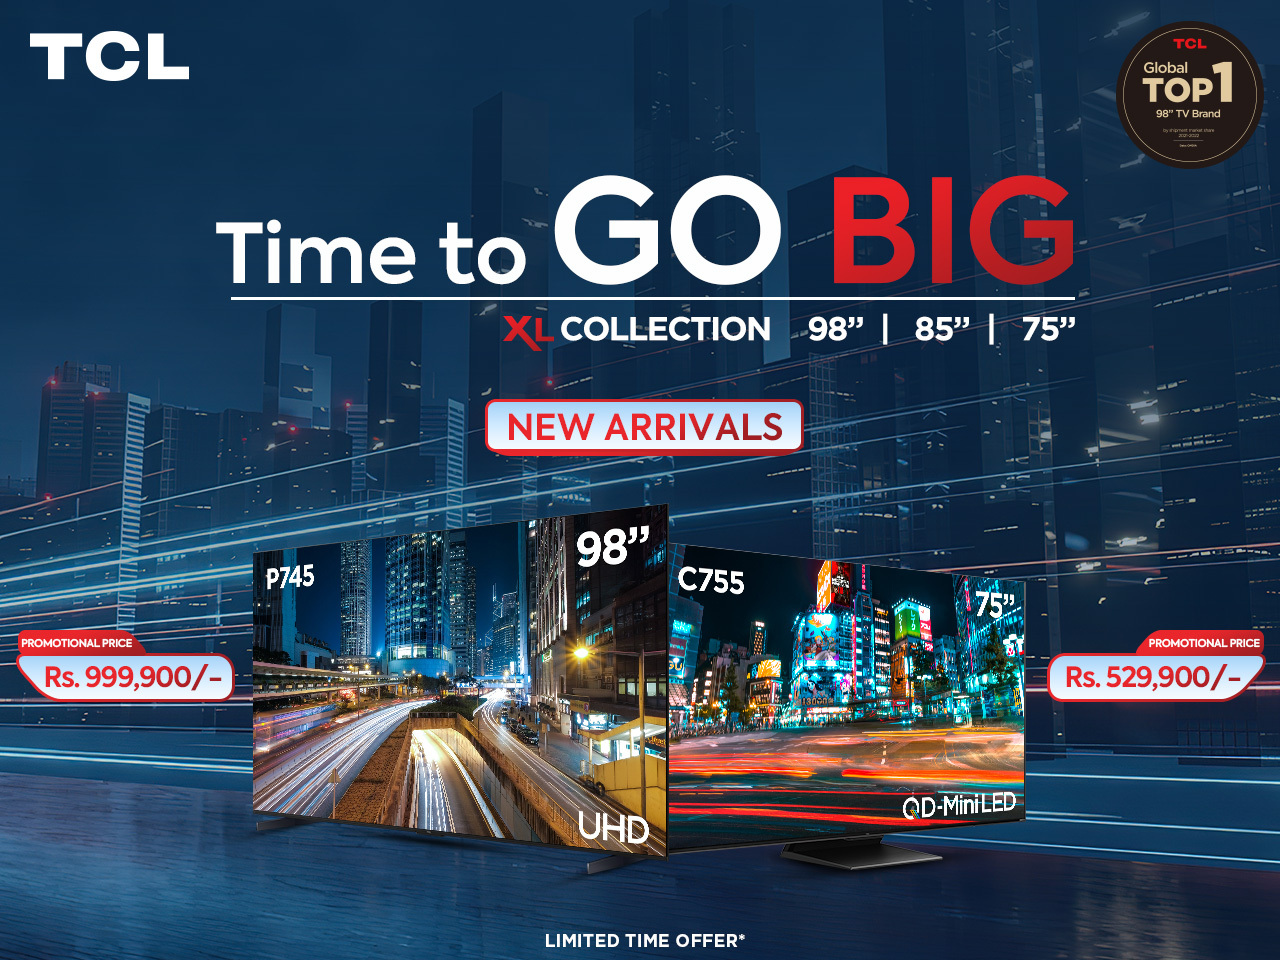 XL Screens, XL Action: Elevate Your Entertainment with the TCL XL Collection